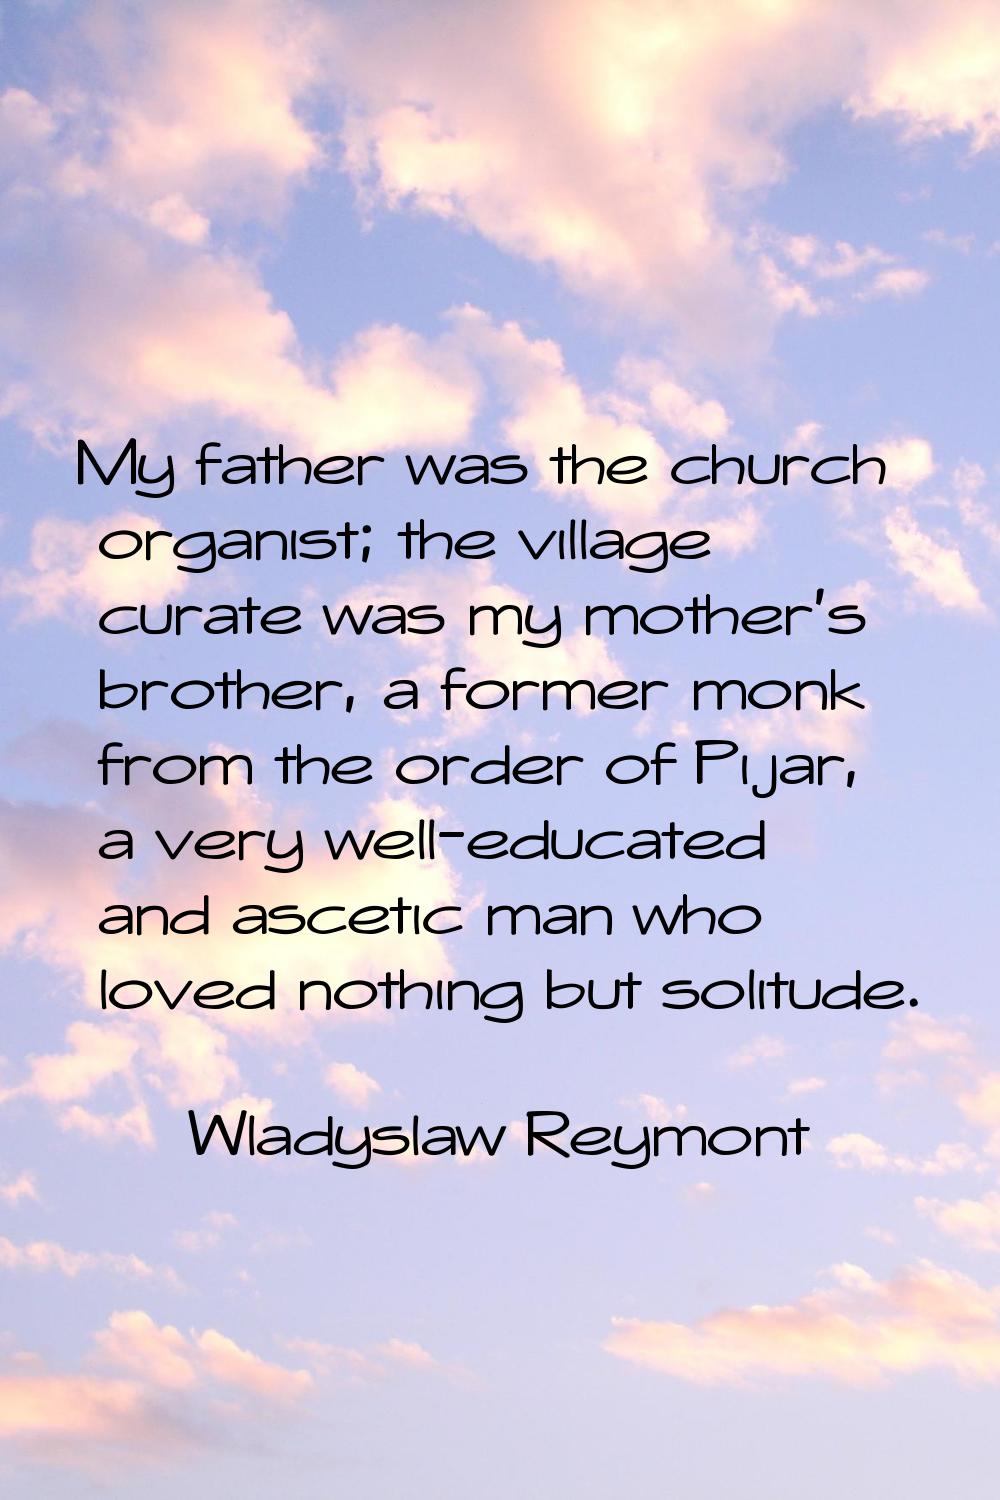 My father was the church organist; the village curate was my mother's brother, a former monk from t